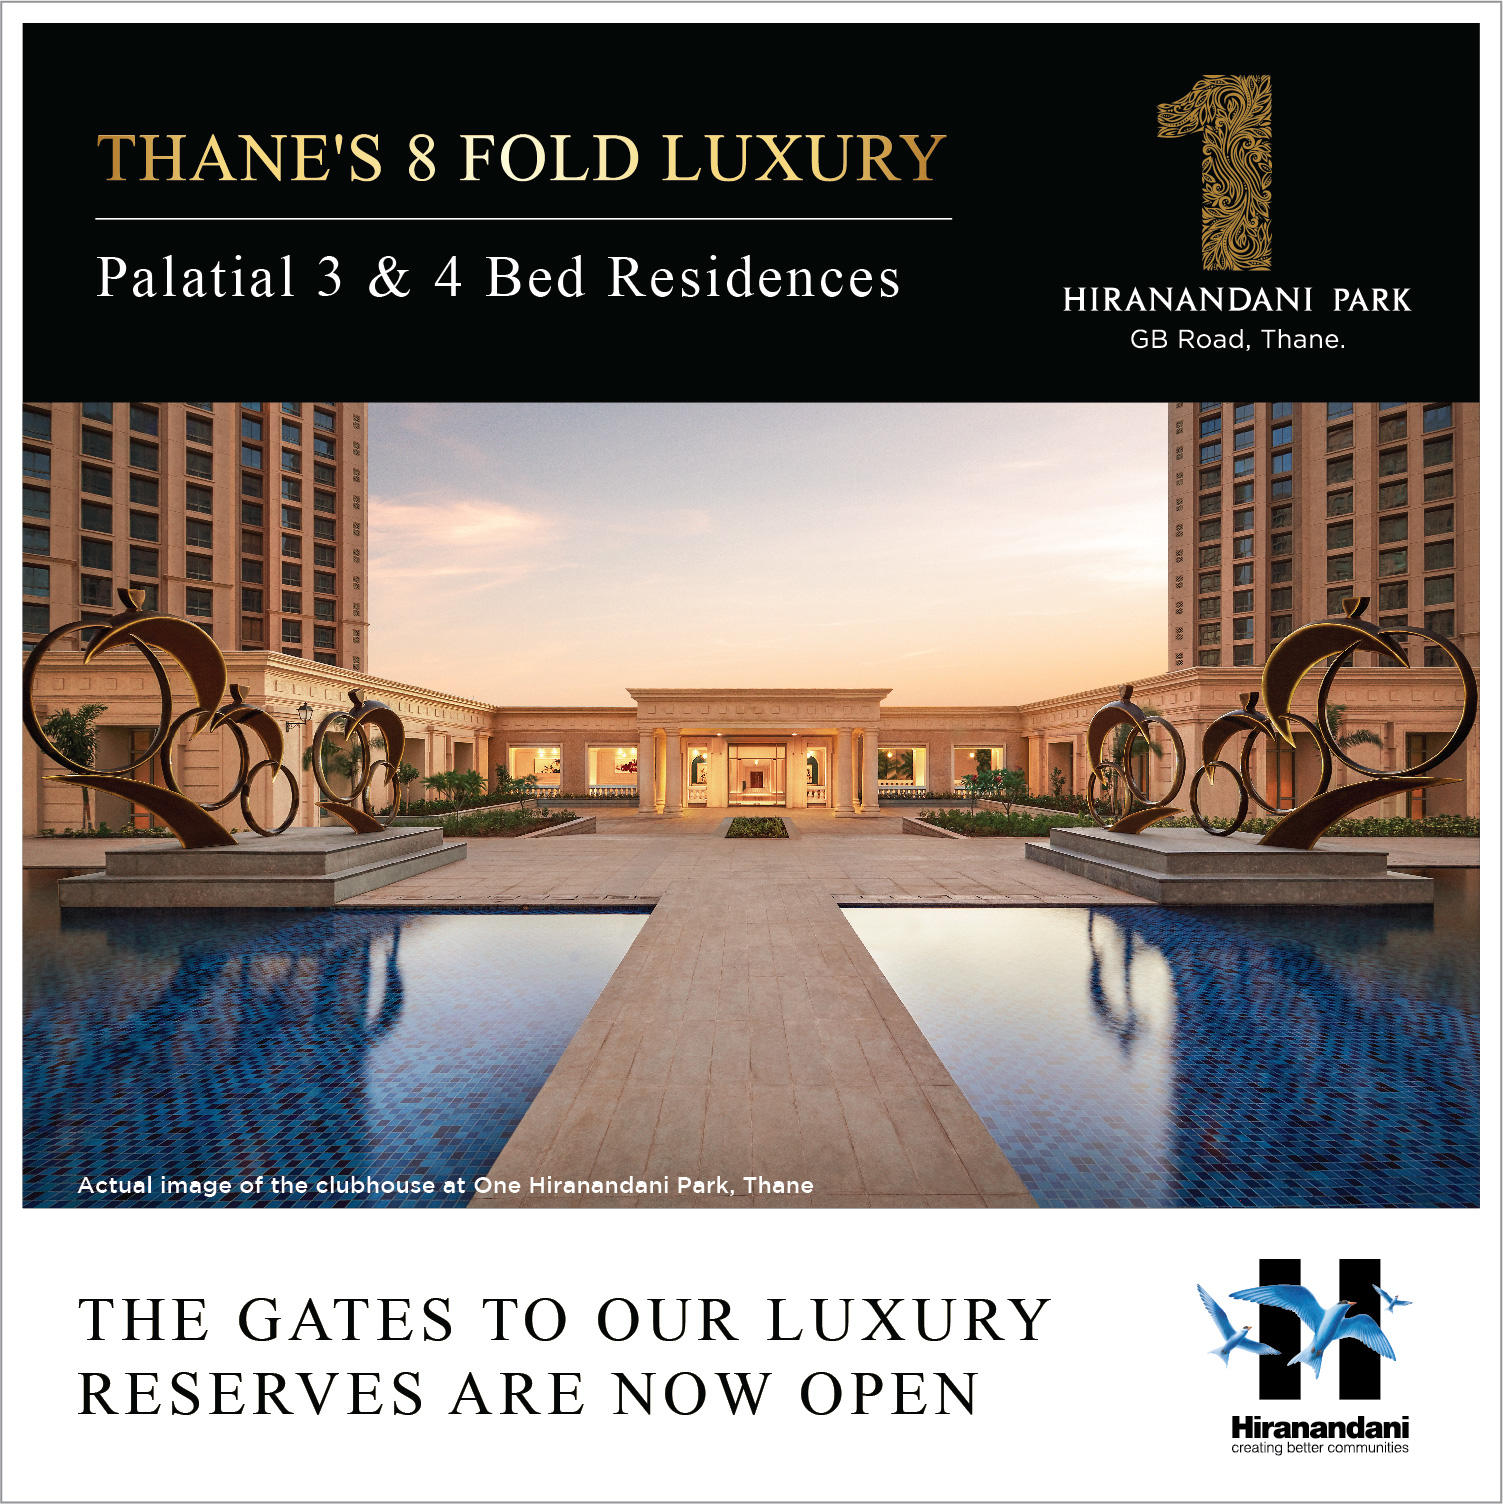 Presenting the gates to our luxury reserves are now open at One Hiranandani Park, Mumbai Update